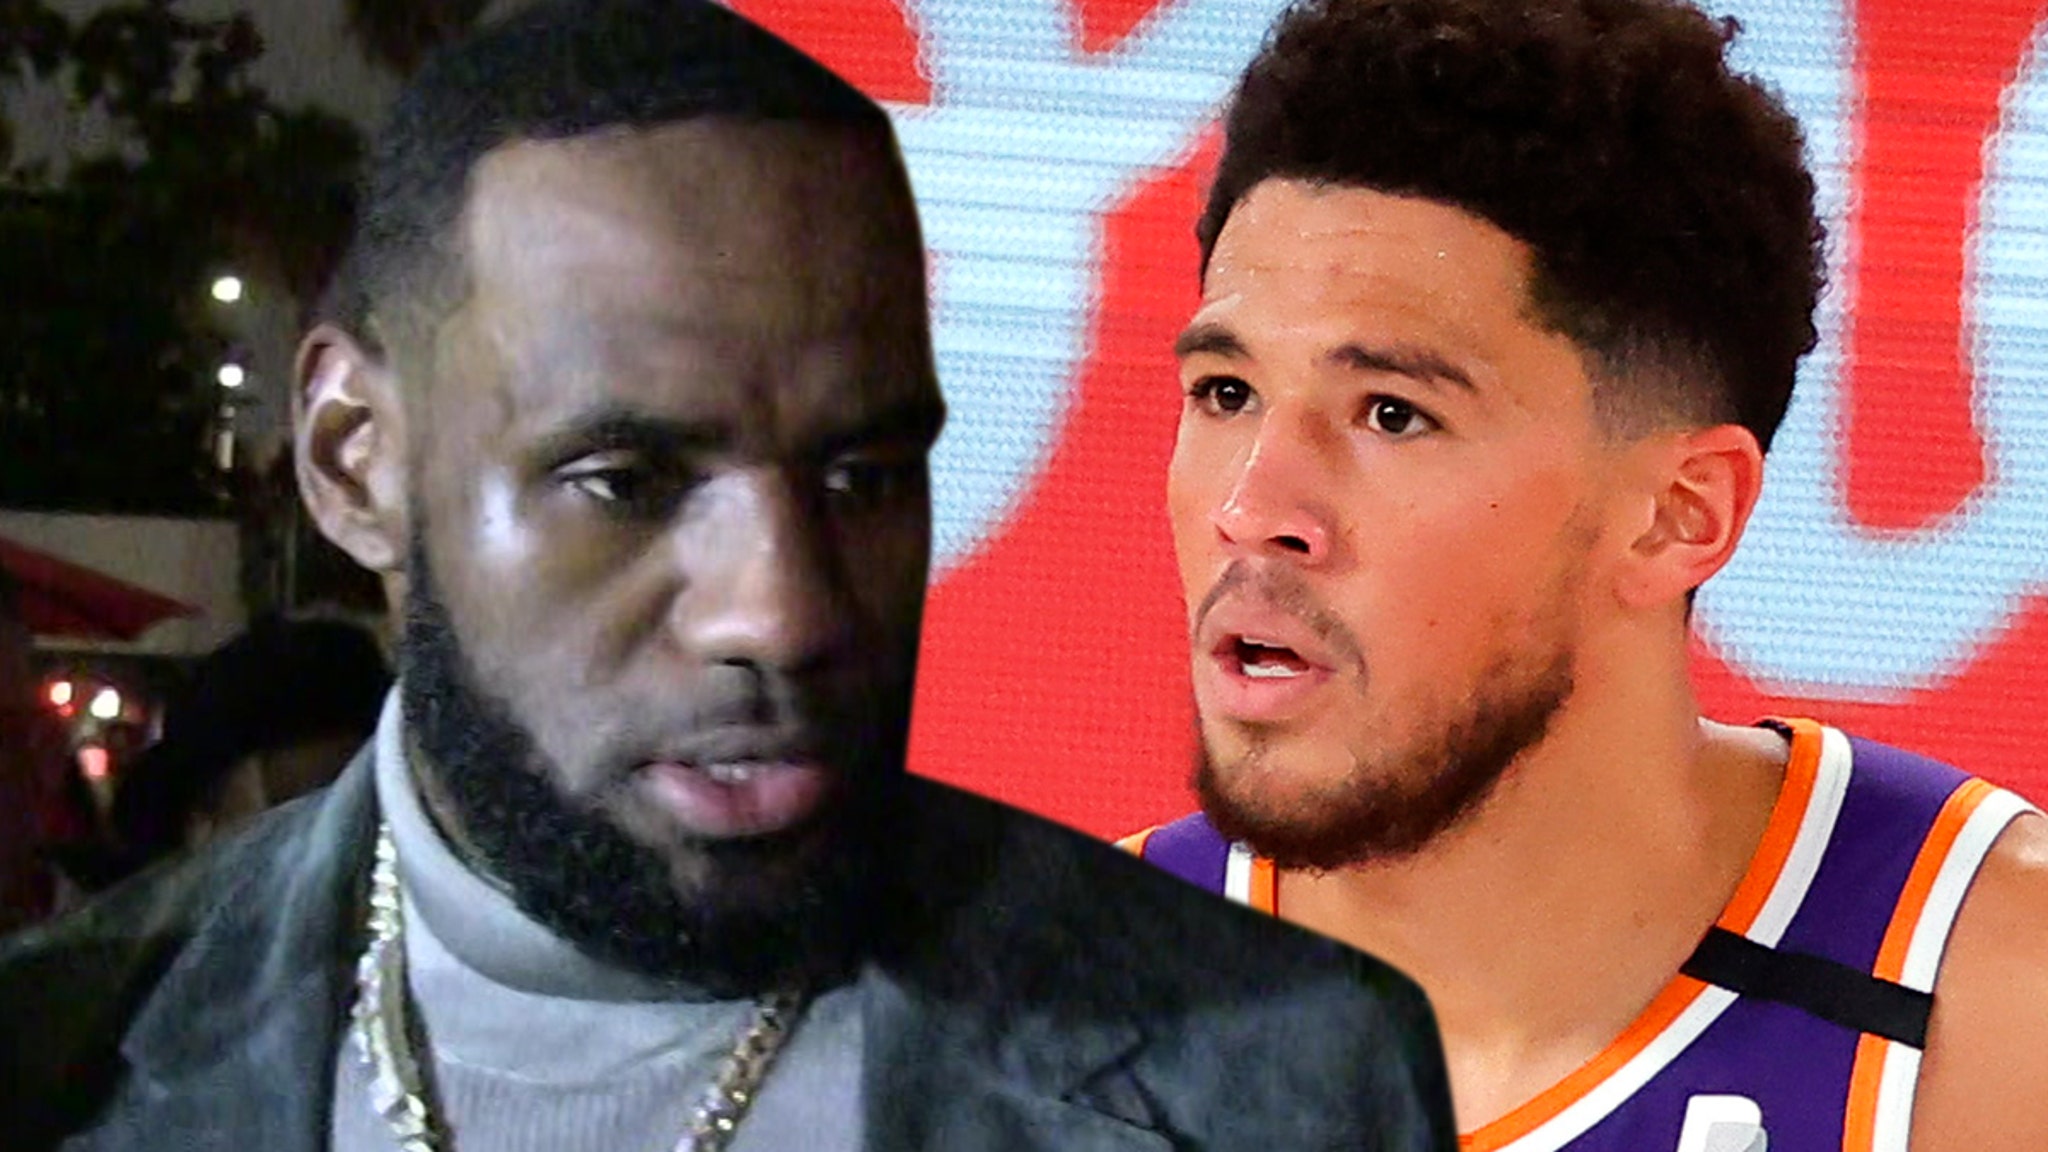 LeBron James calls Devin Booker ‘the most respected player’ in the NBA after All-Star Snub